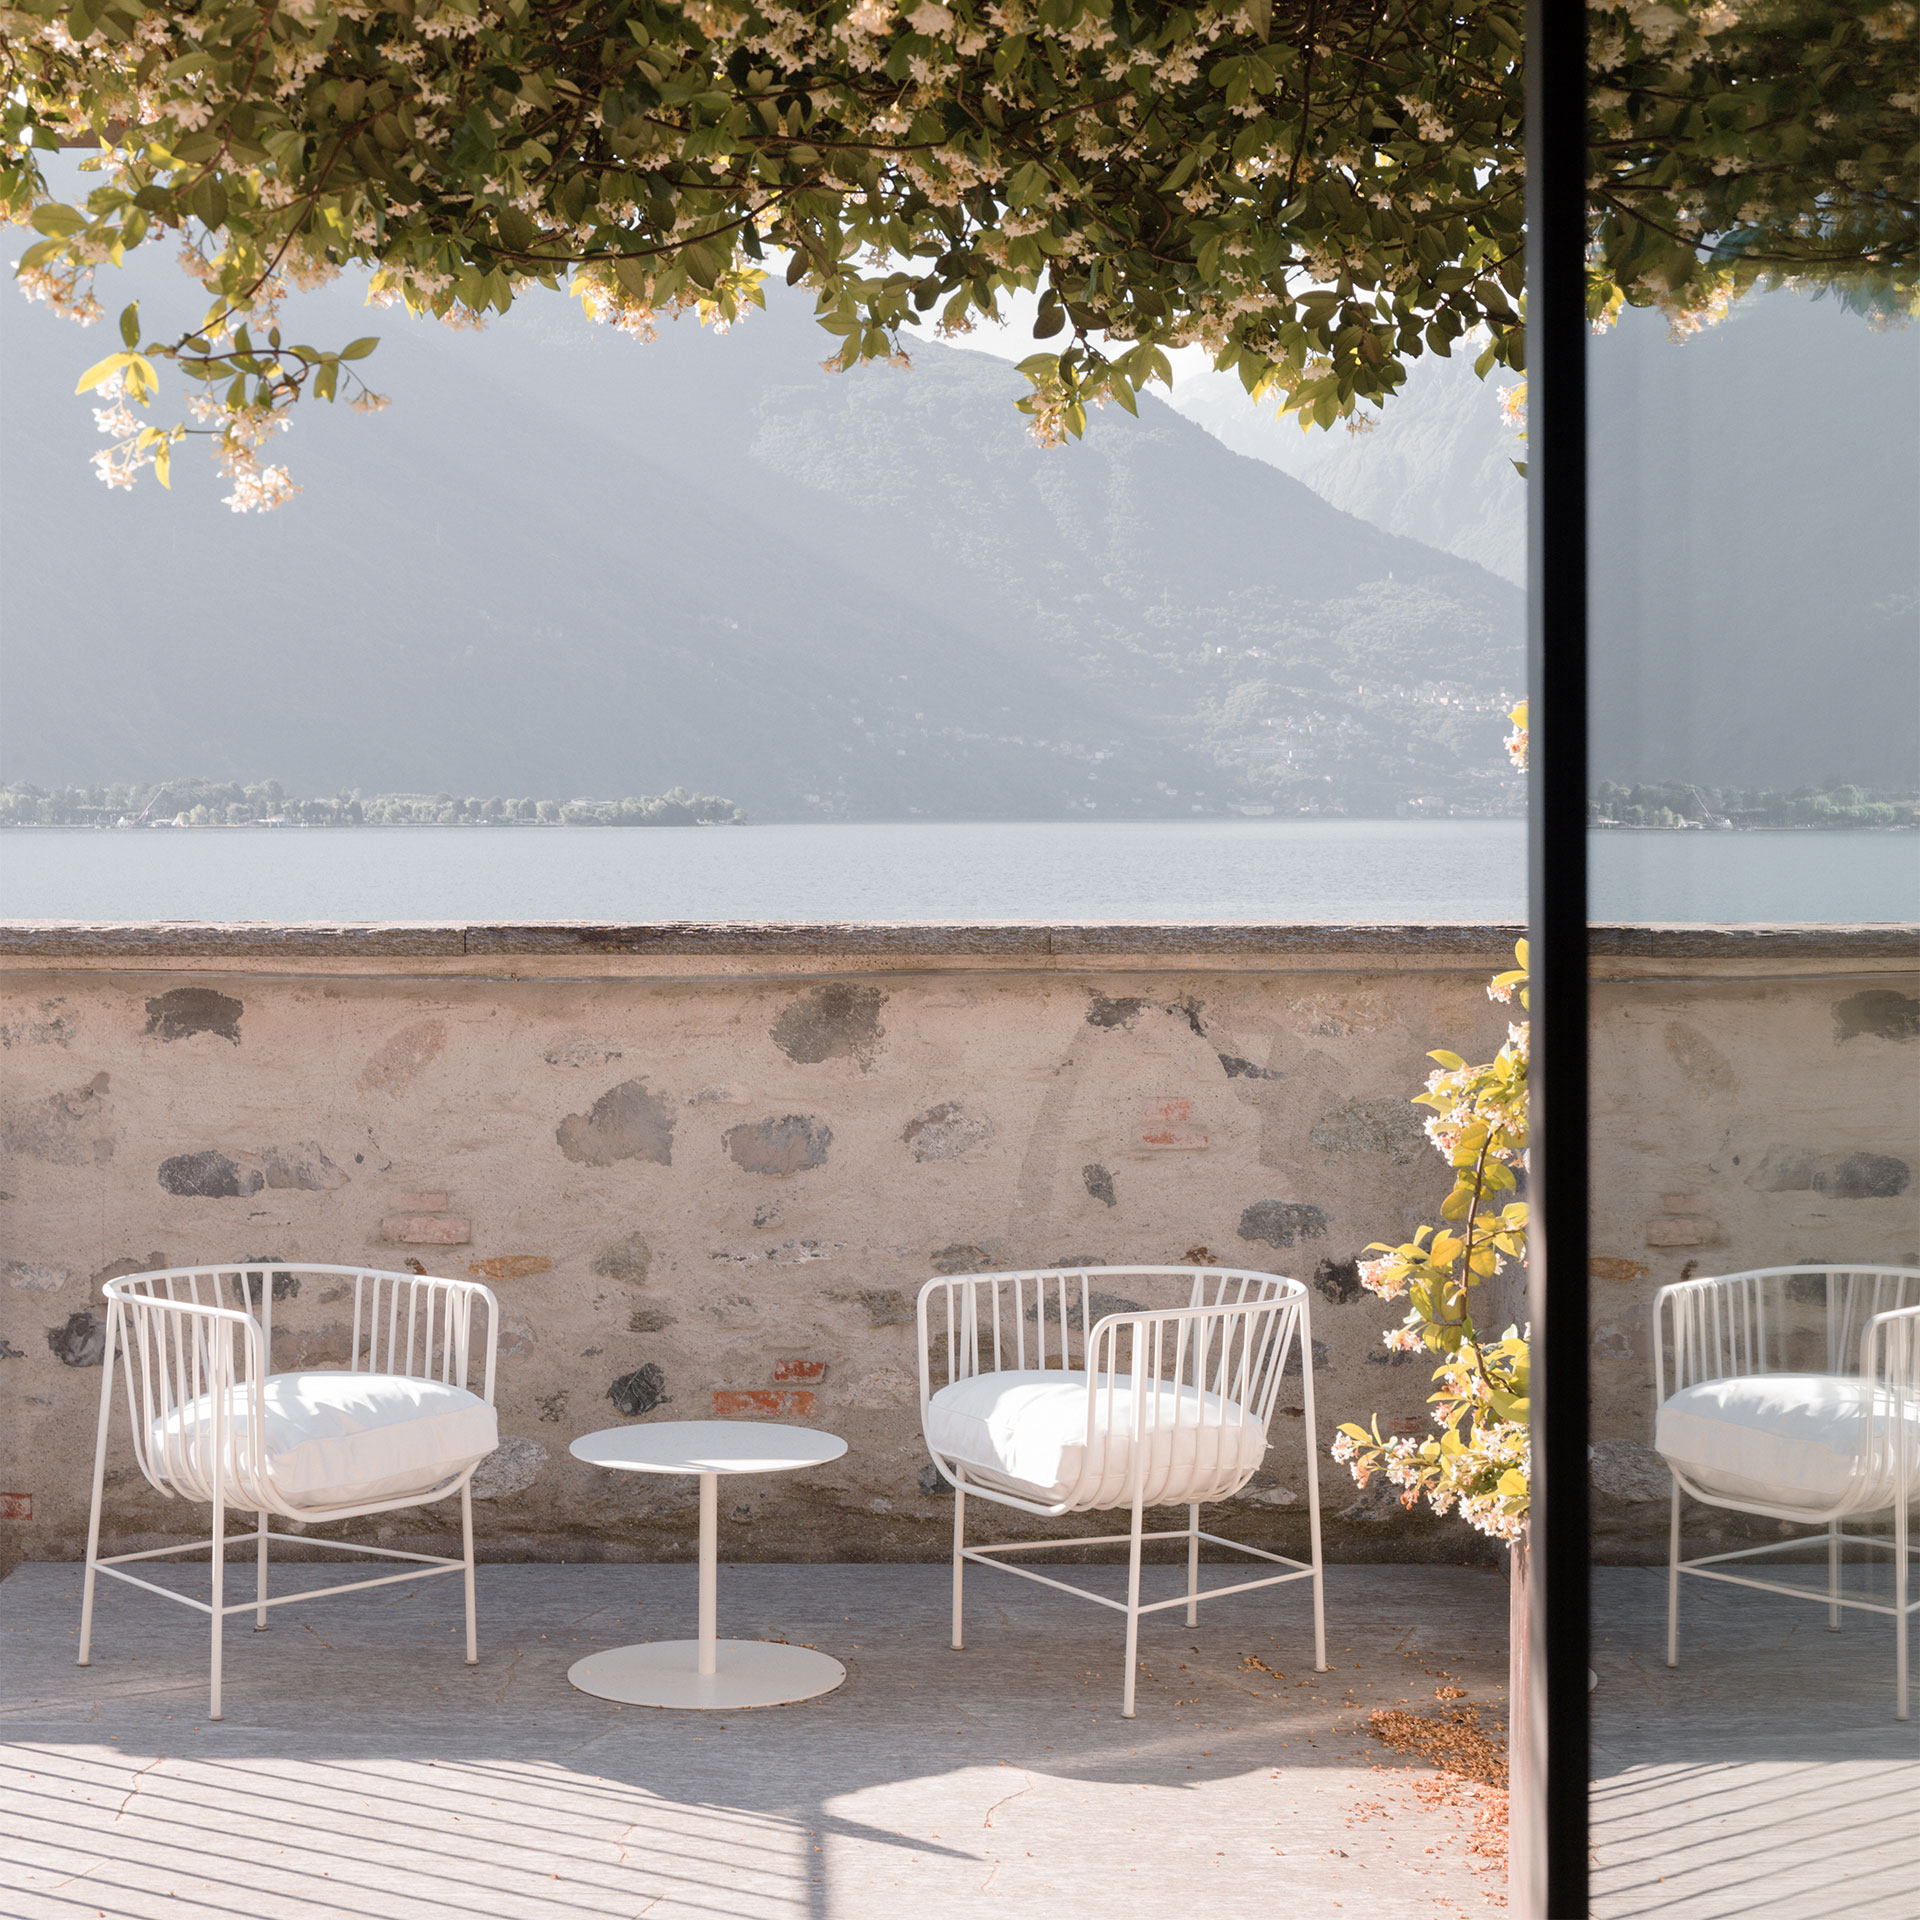 Casa Olea Hotel is a renovated old vicarage located in Cremia, Lake Como - Italy, with 13 beautifully captivating rooms and suites to make your holiday exclusive and relaxing.